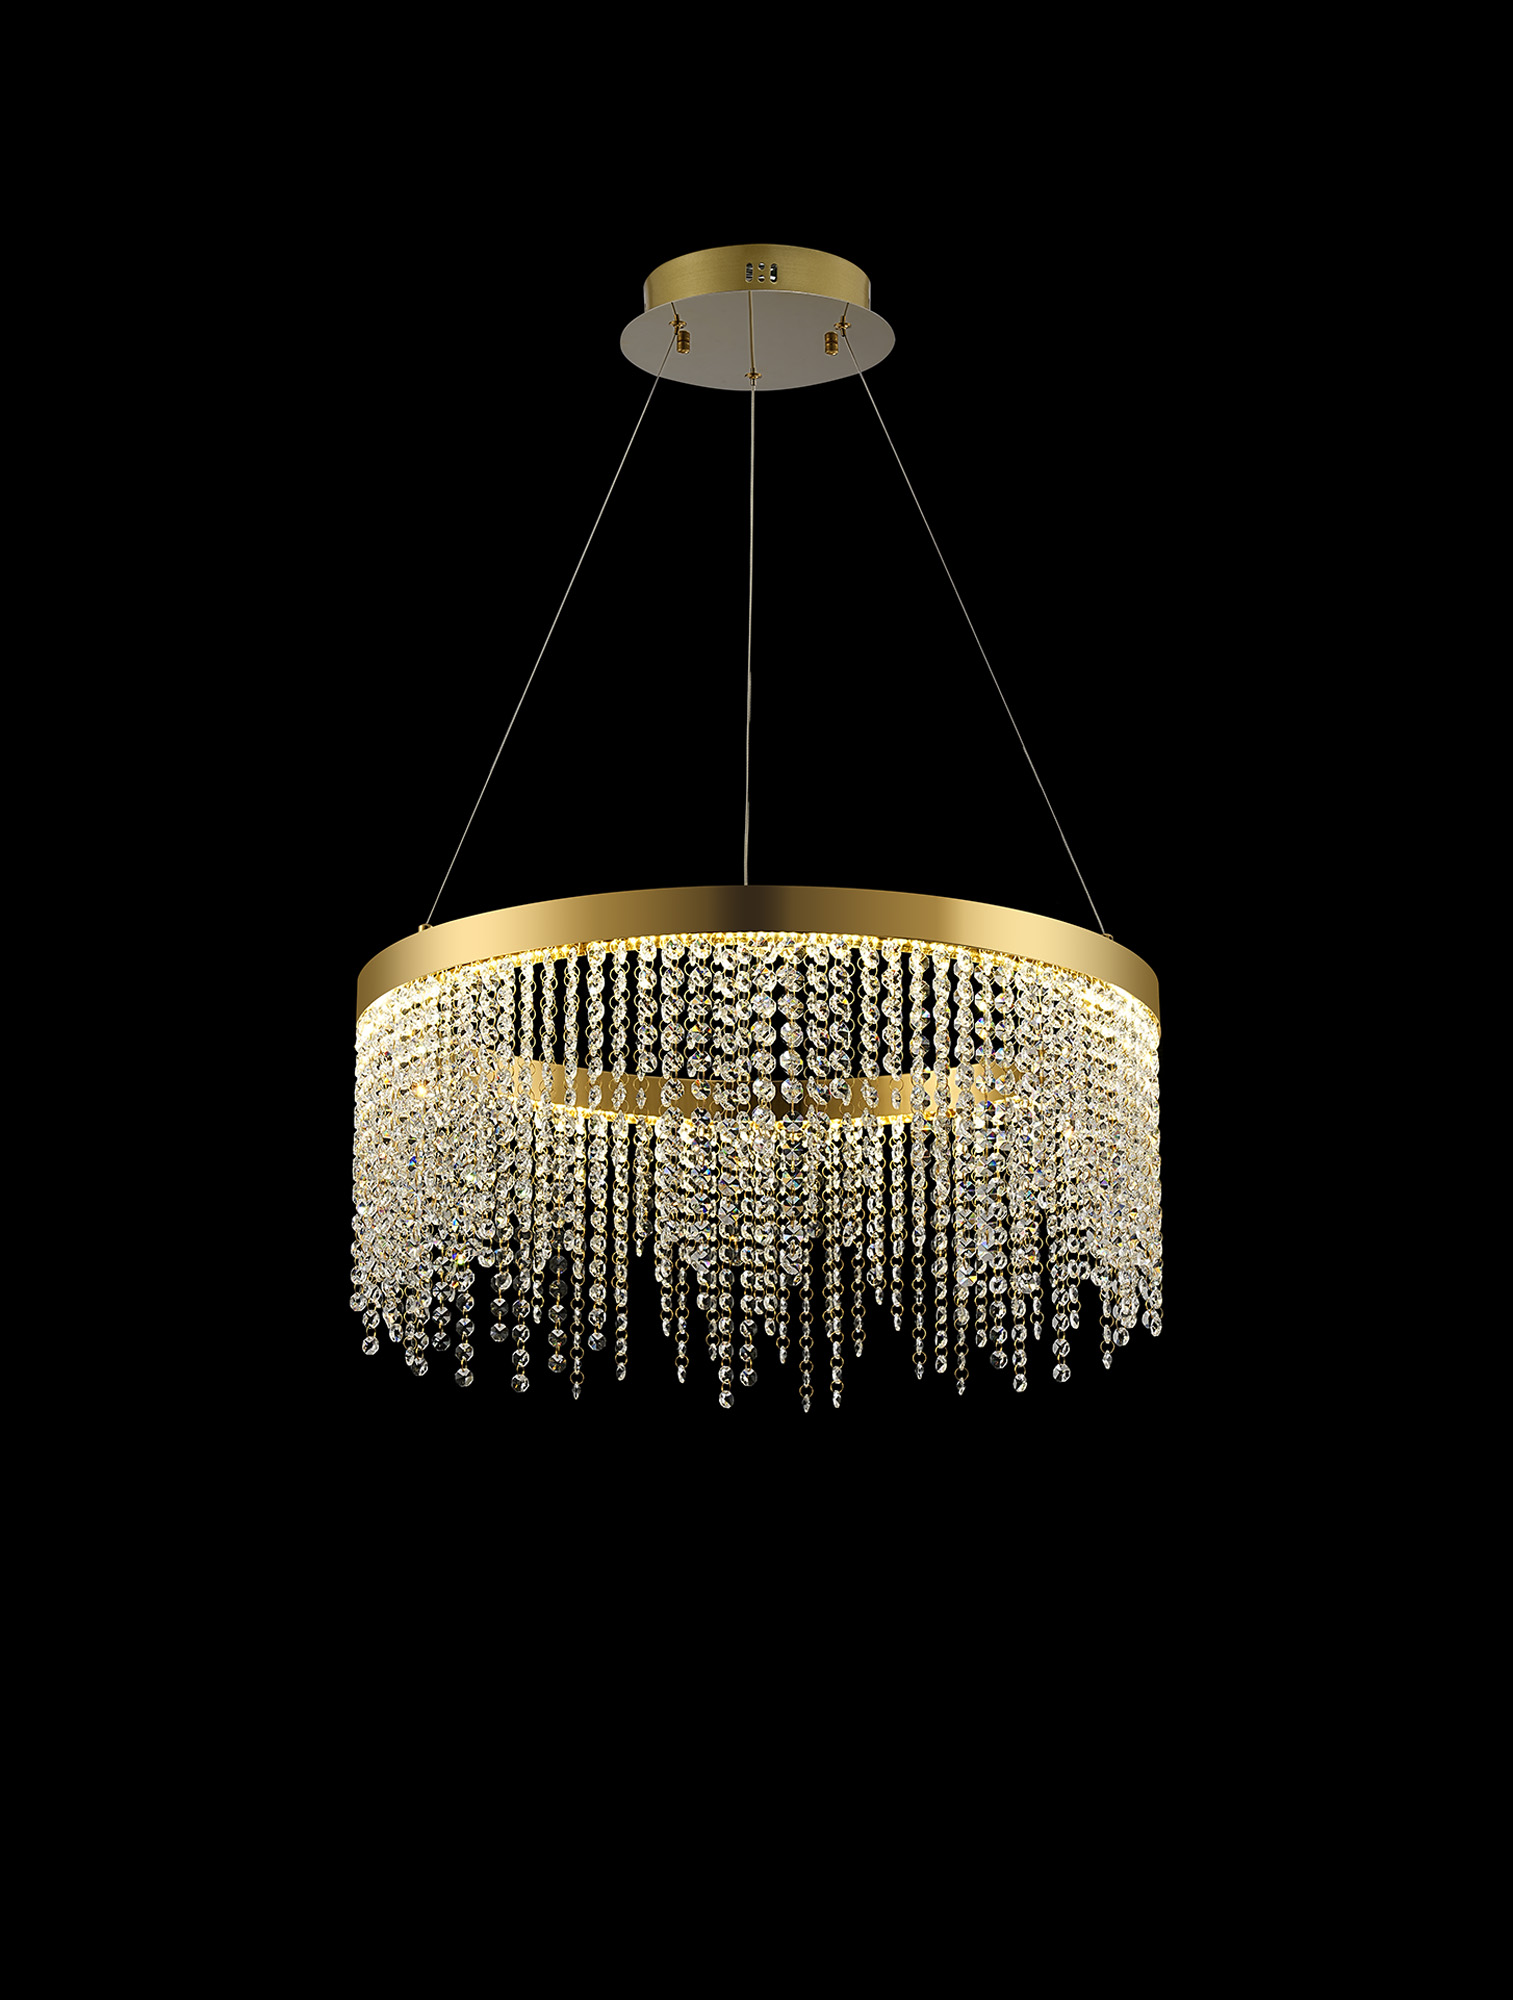 Bano French Gold Crystal Ceiling Lights Diyas Ringed & Square Crystal Fittings